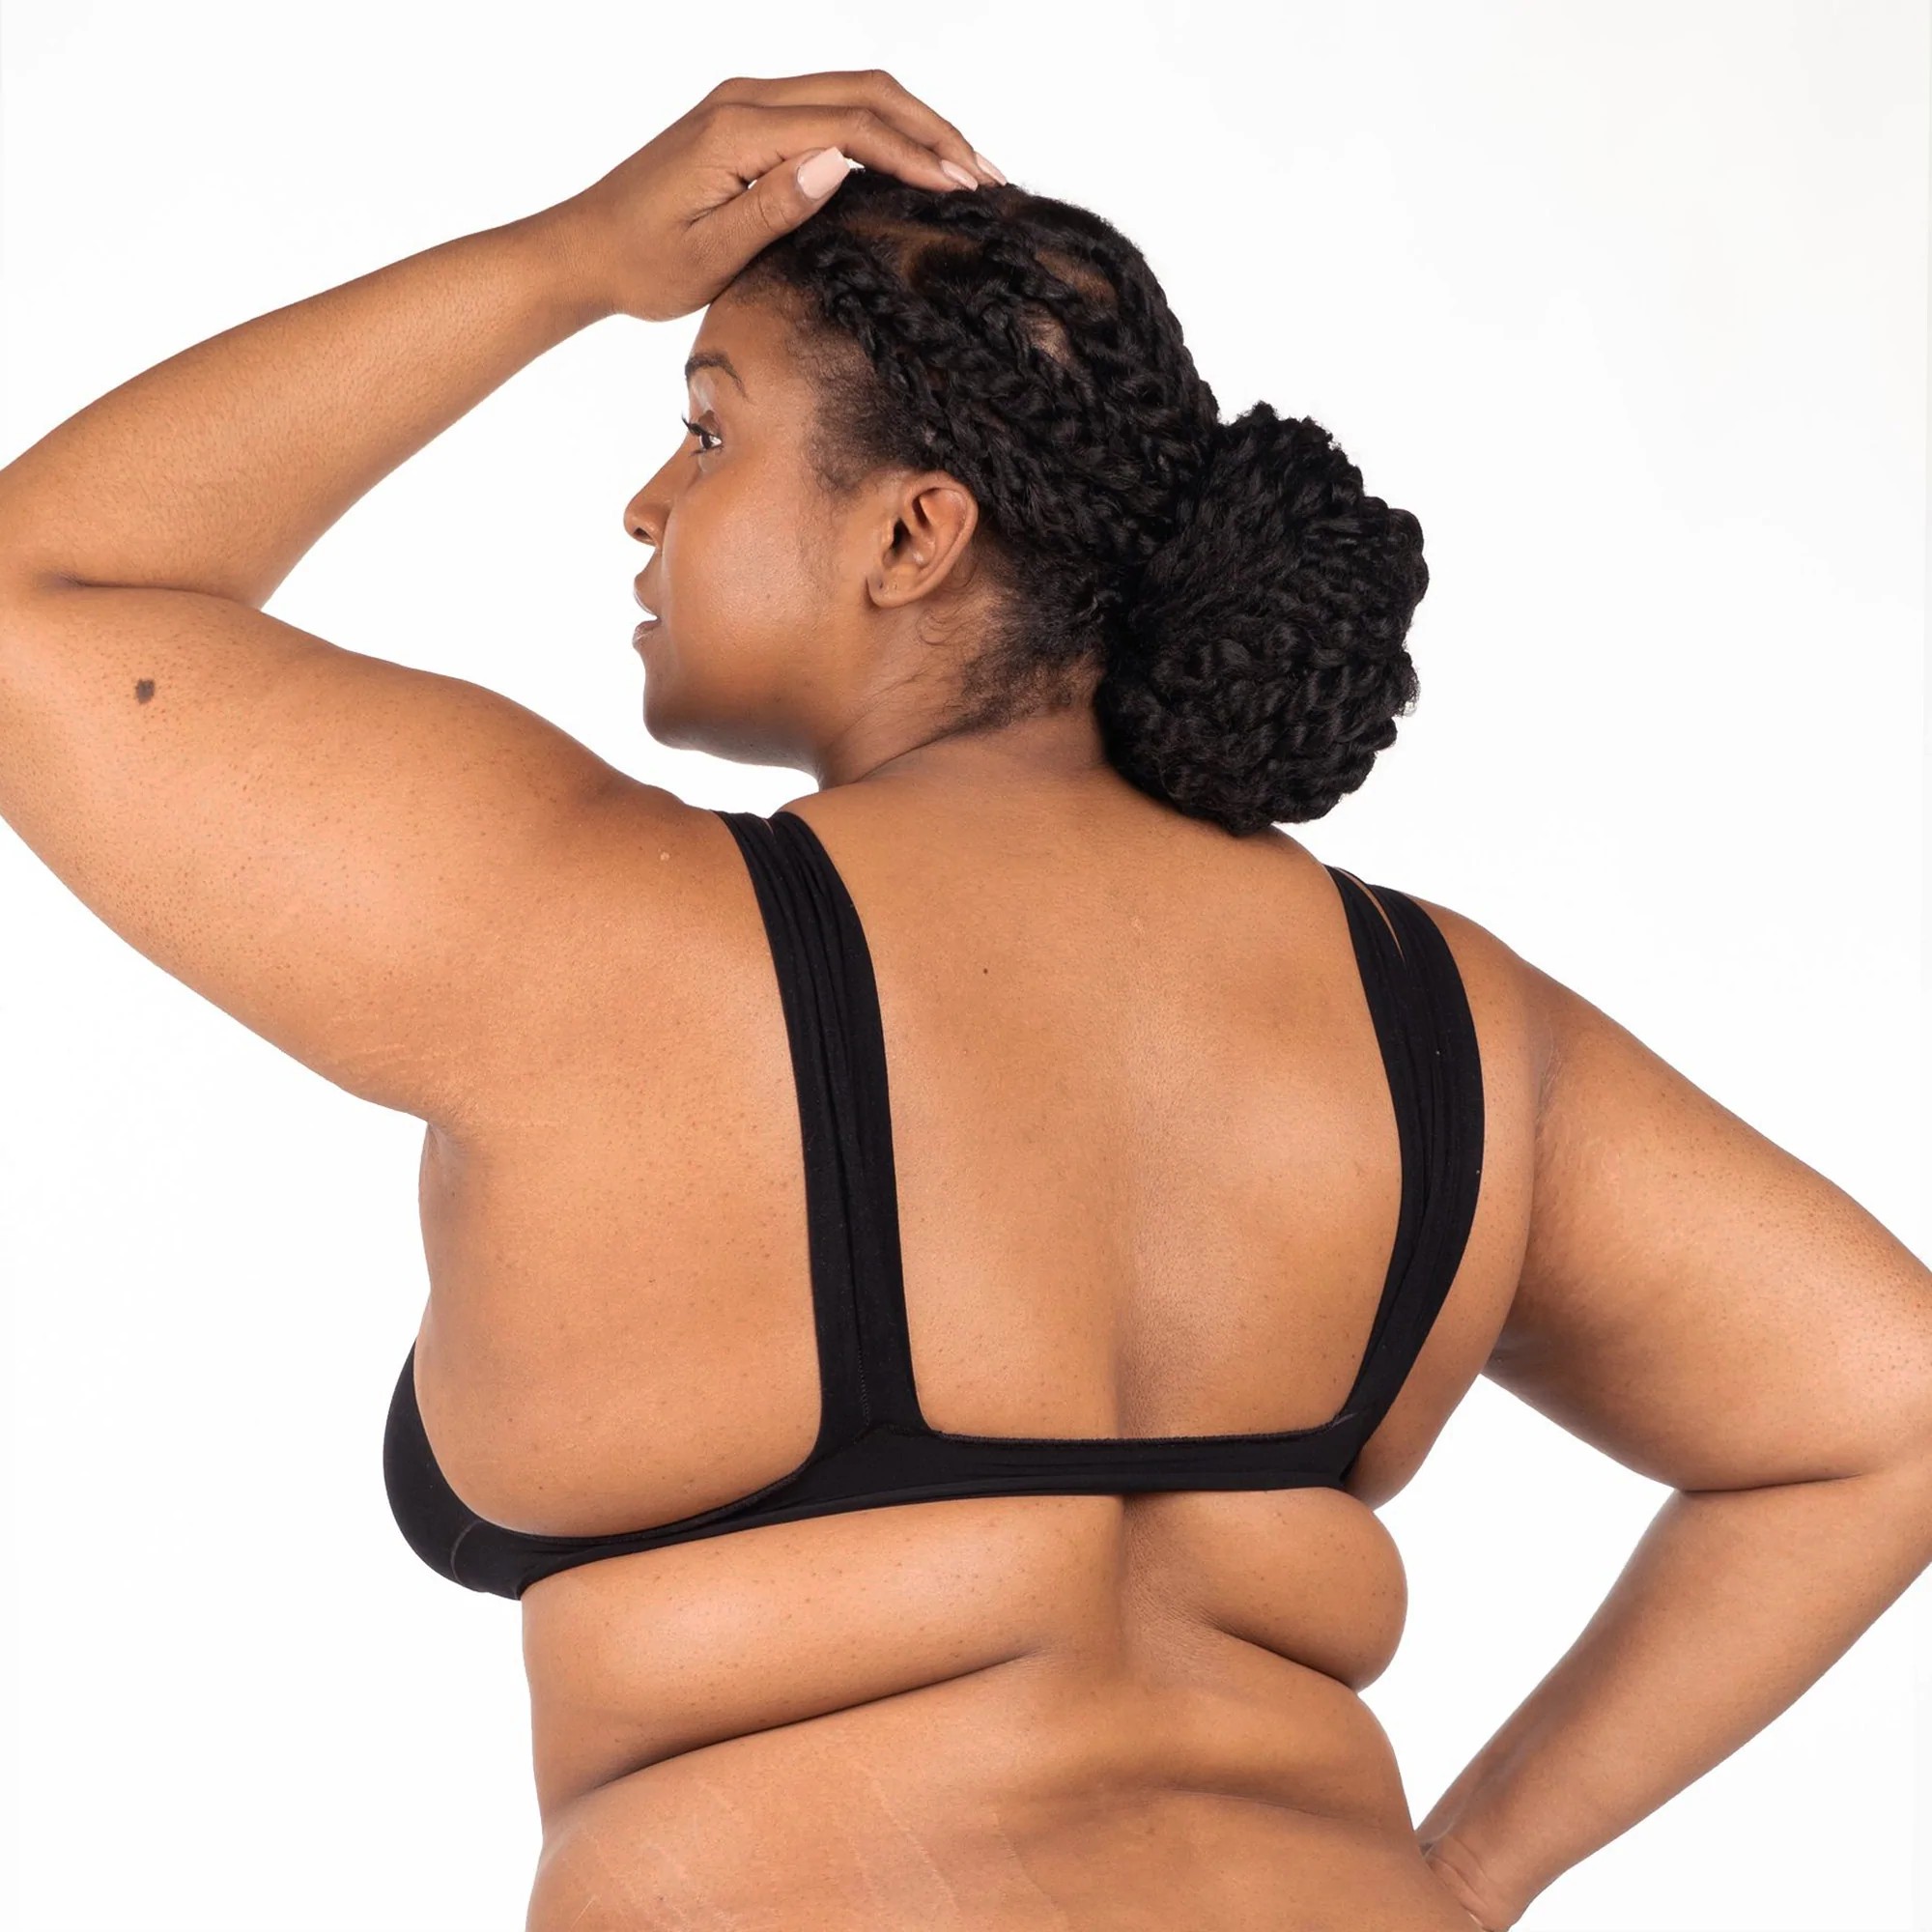 Nuudii System Bra Review: The Bra For Women Who Hate Bras